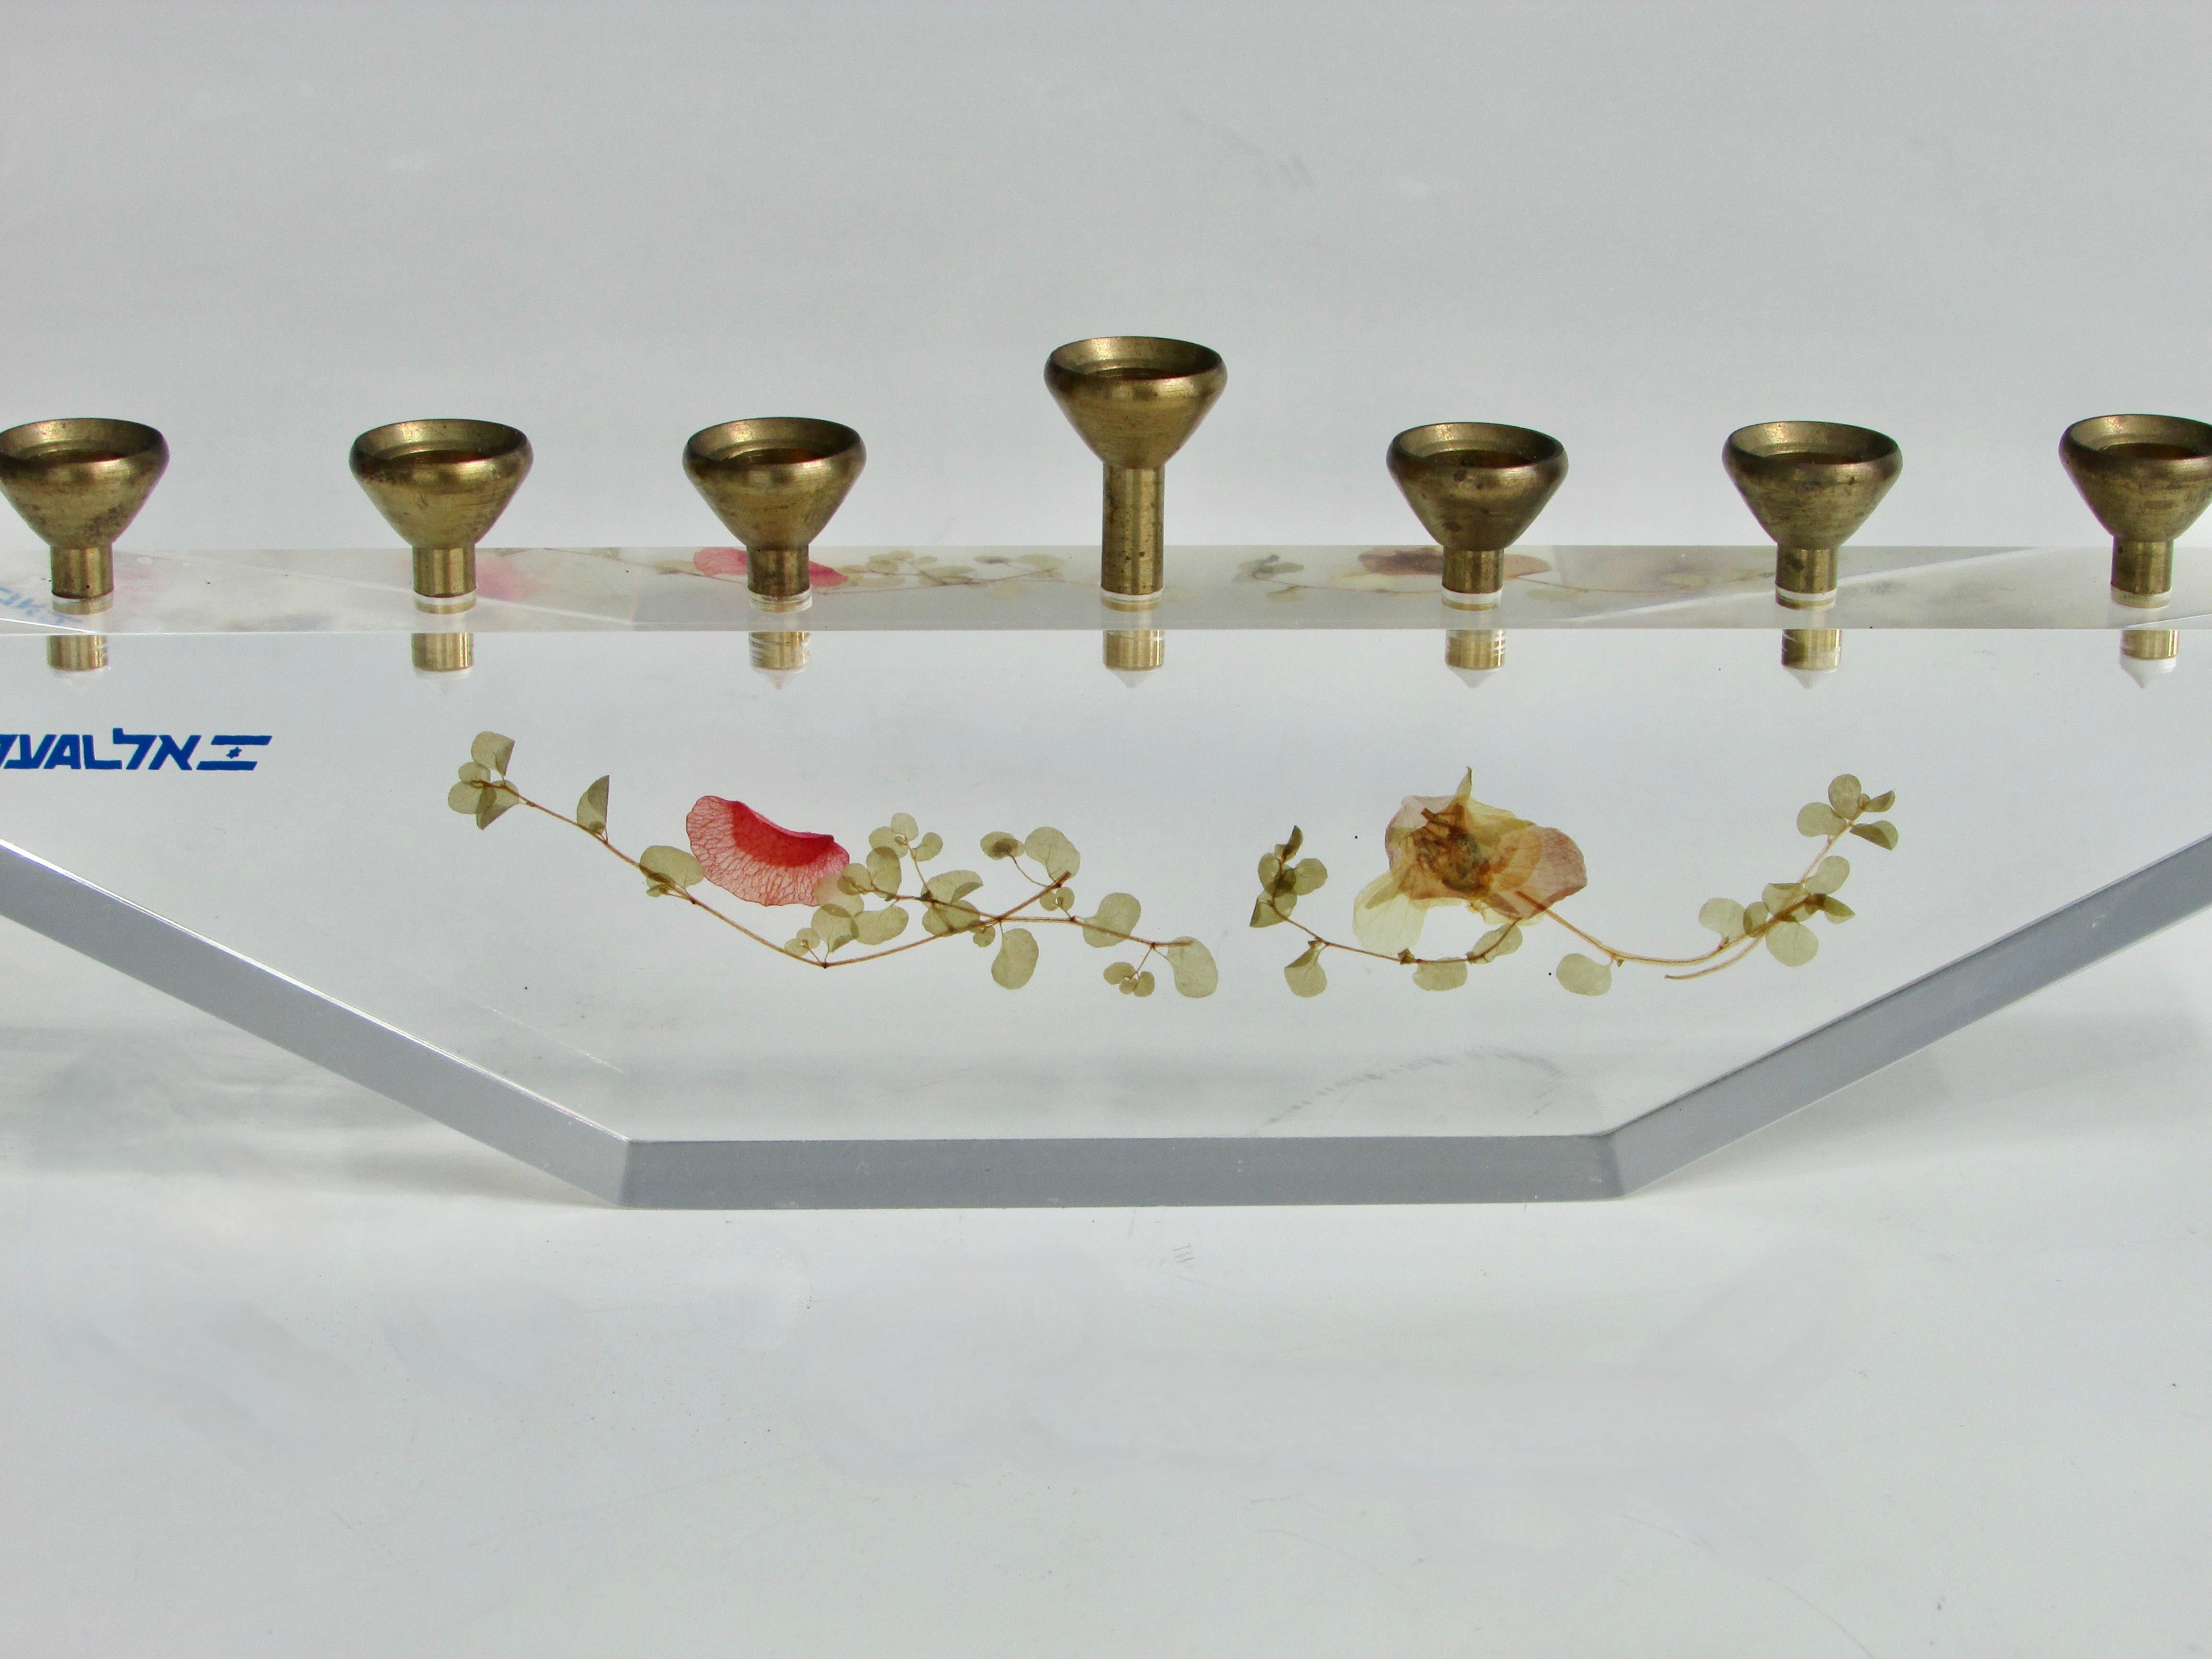 Nine Candle Modernist Menorah Set in Lucite Stand with Dried Floral Decoration In Good Condition For Sale In Ferndale, MI